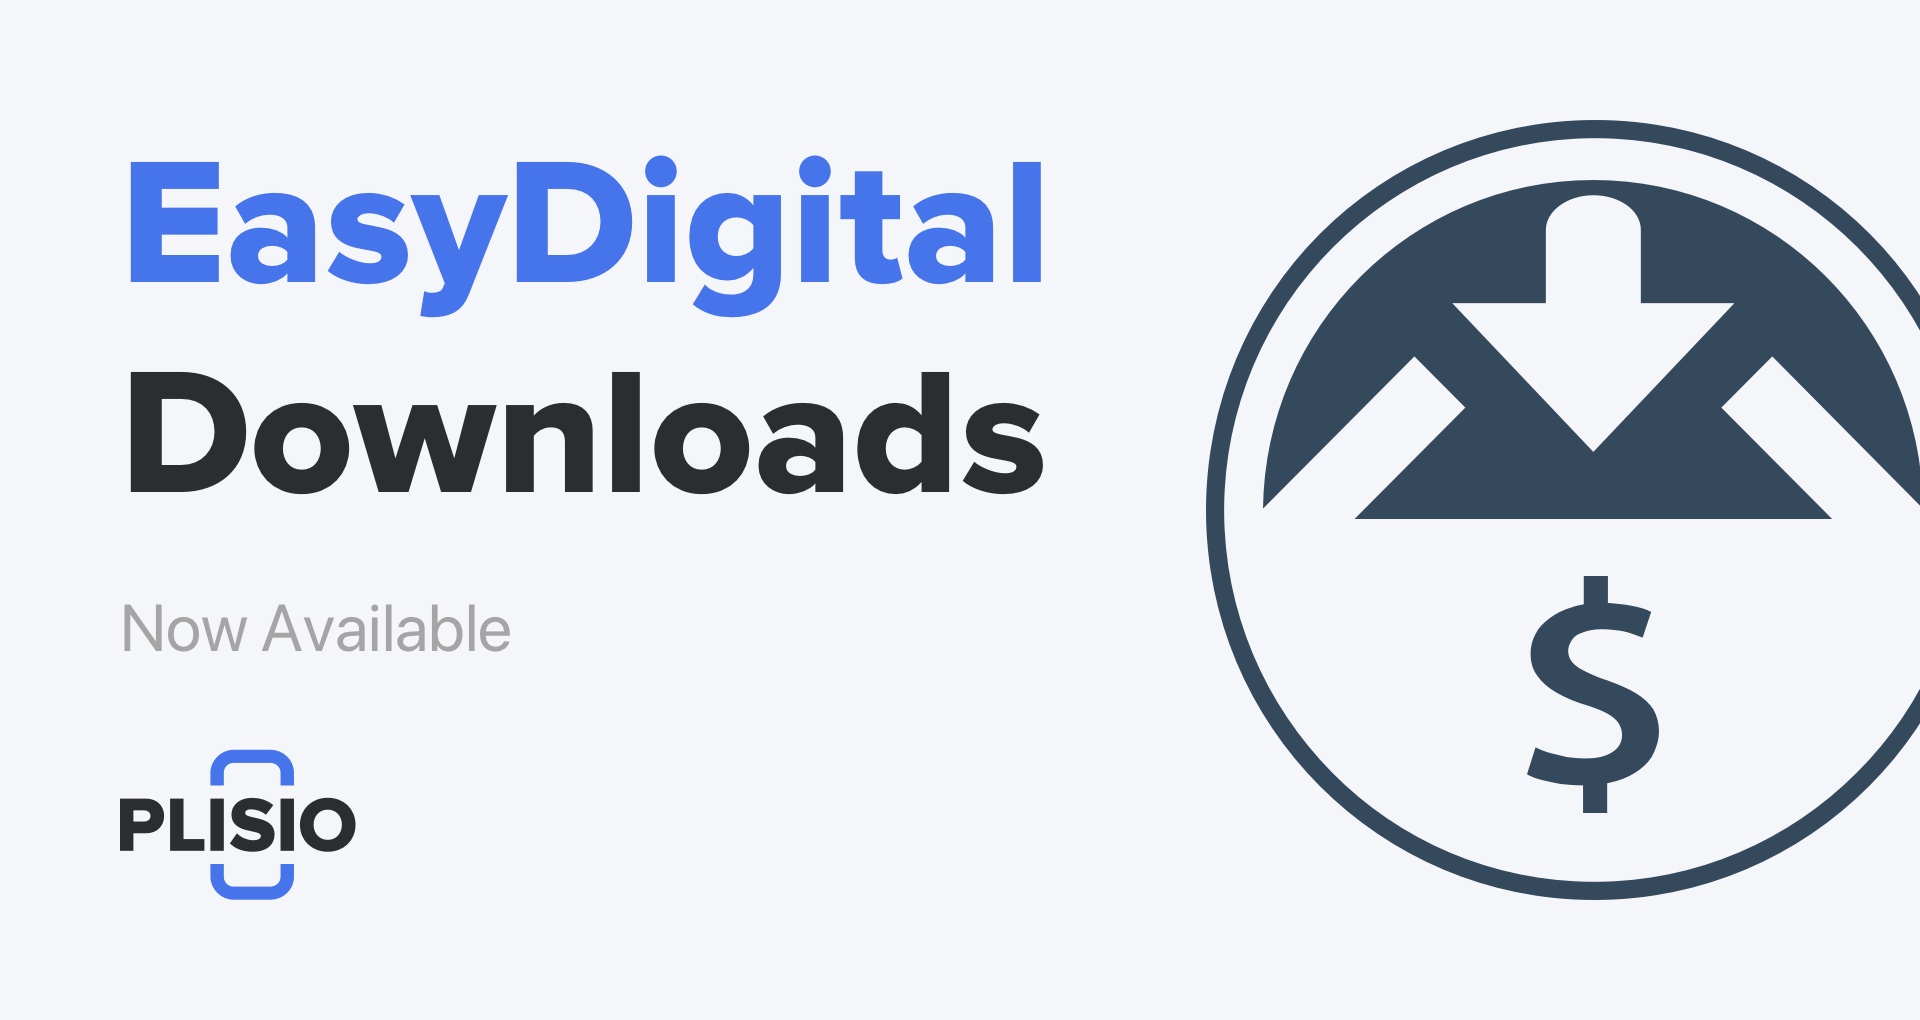 Easy Digital Downloads Plugin is Available. It’s Time to Connect!